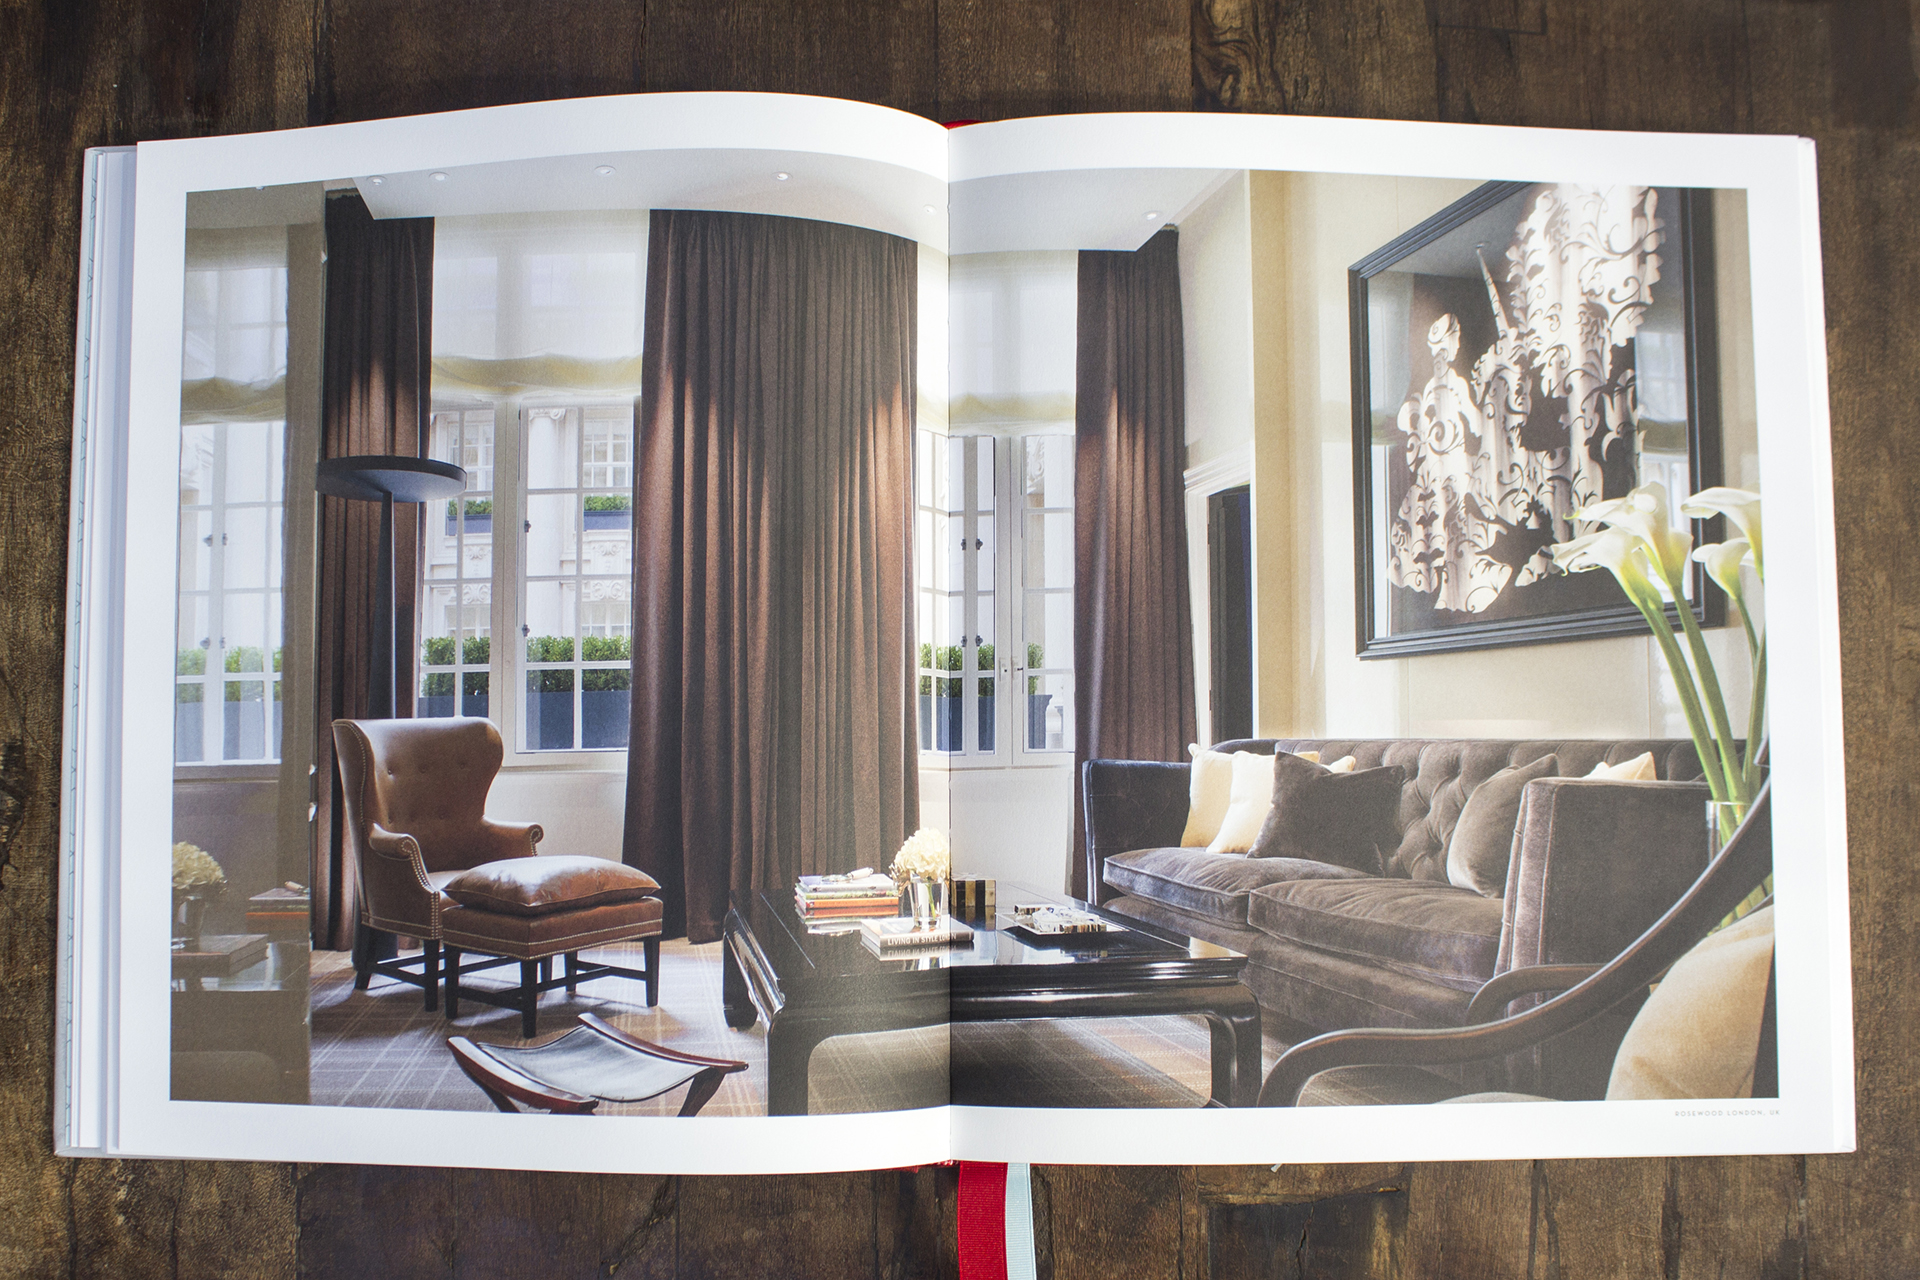 Two-page spread viewed from above showing interior photography